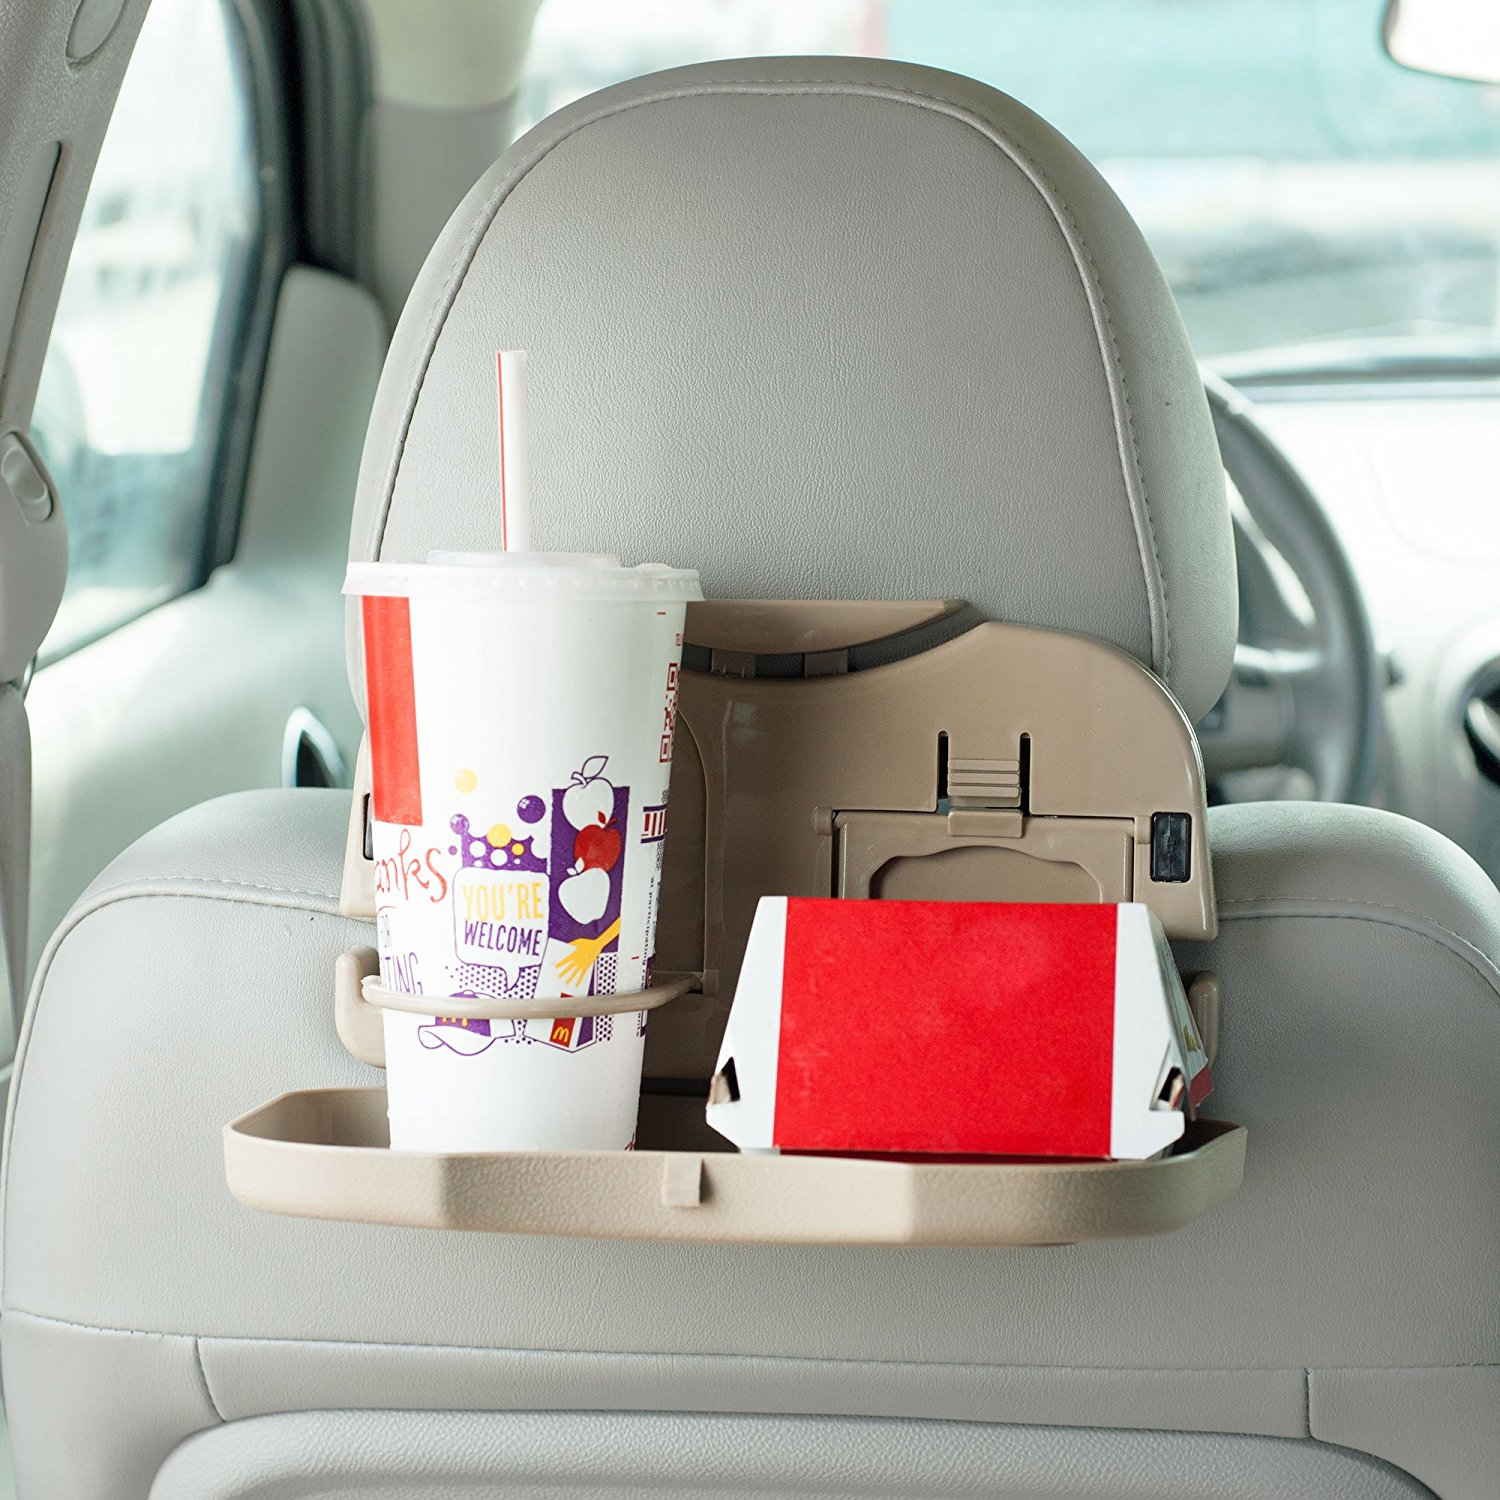 Trademark Mobile Backseat Folding Dinner Tray Only $5.99 – PERFECT for Road Trips!